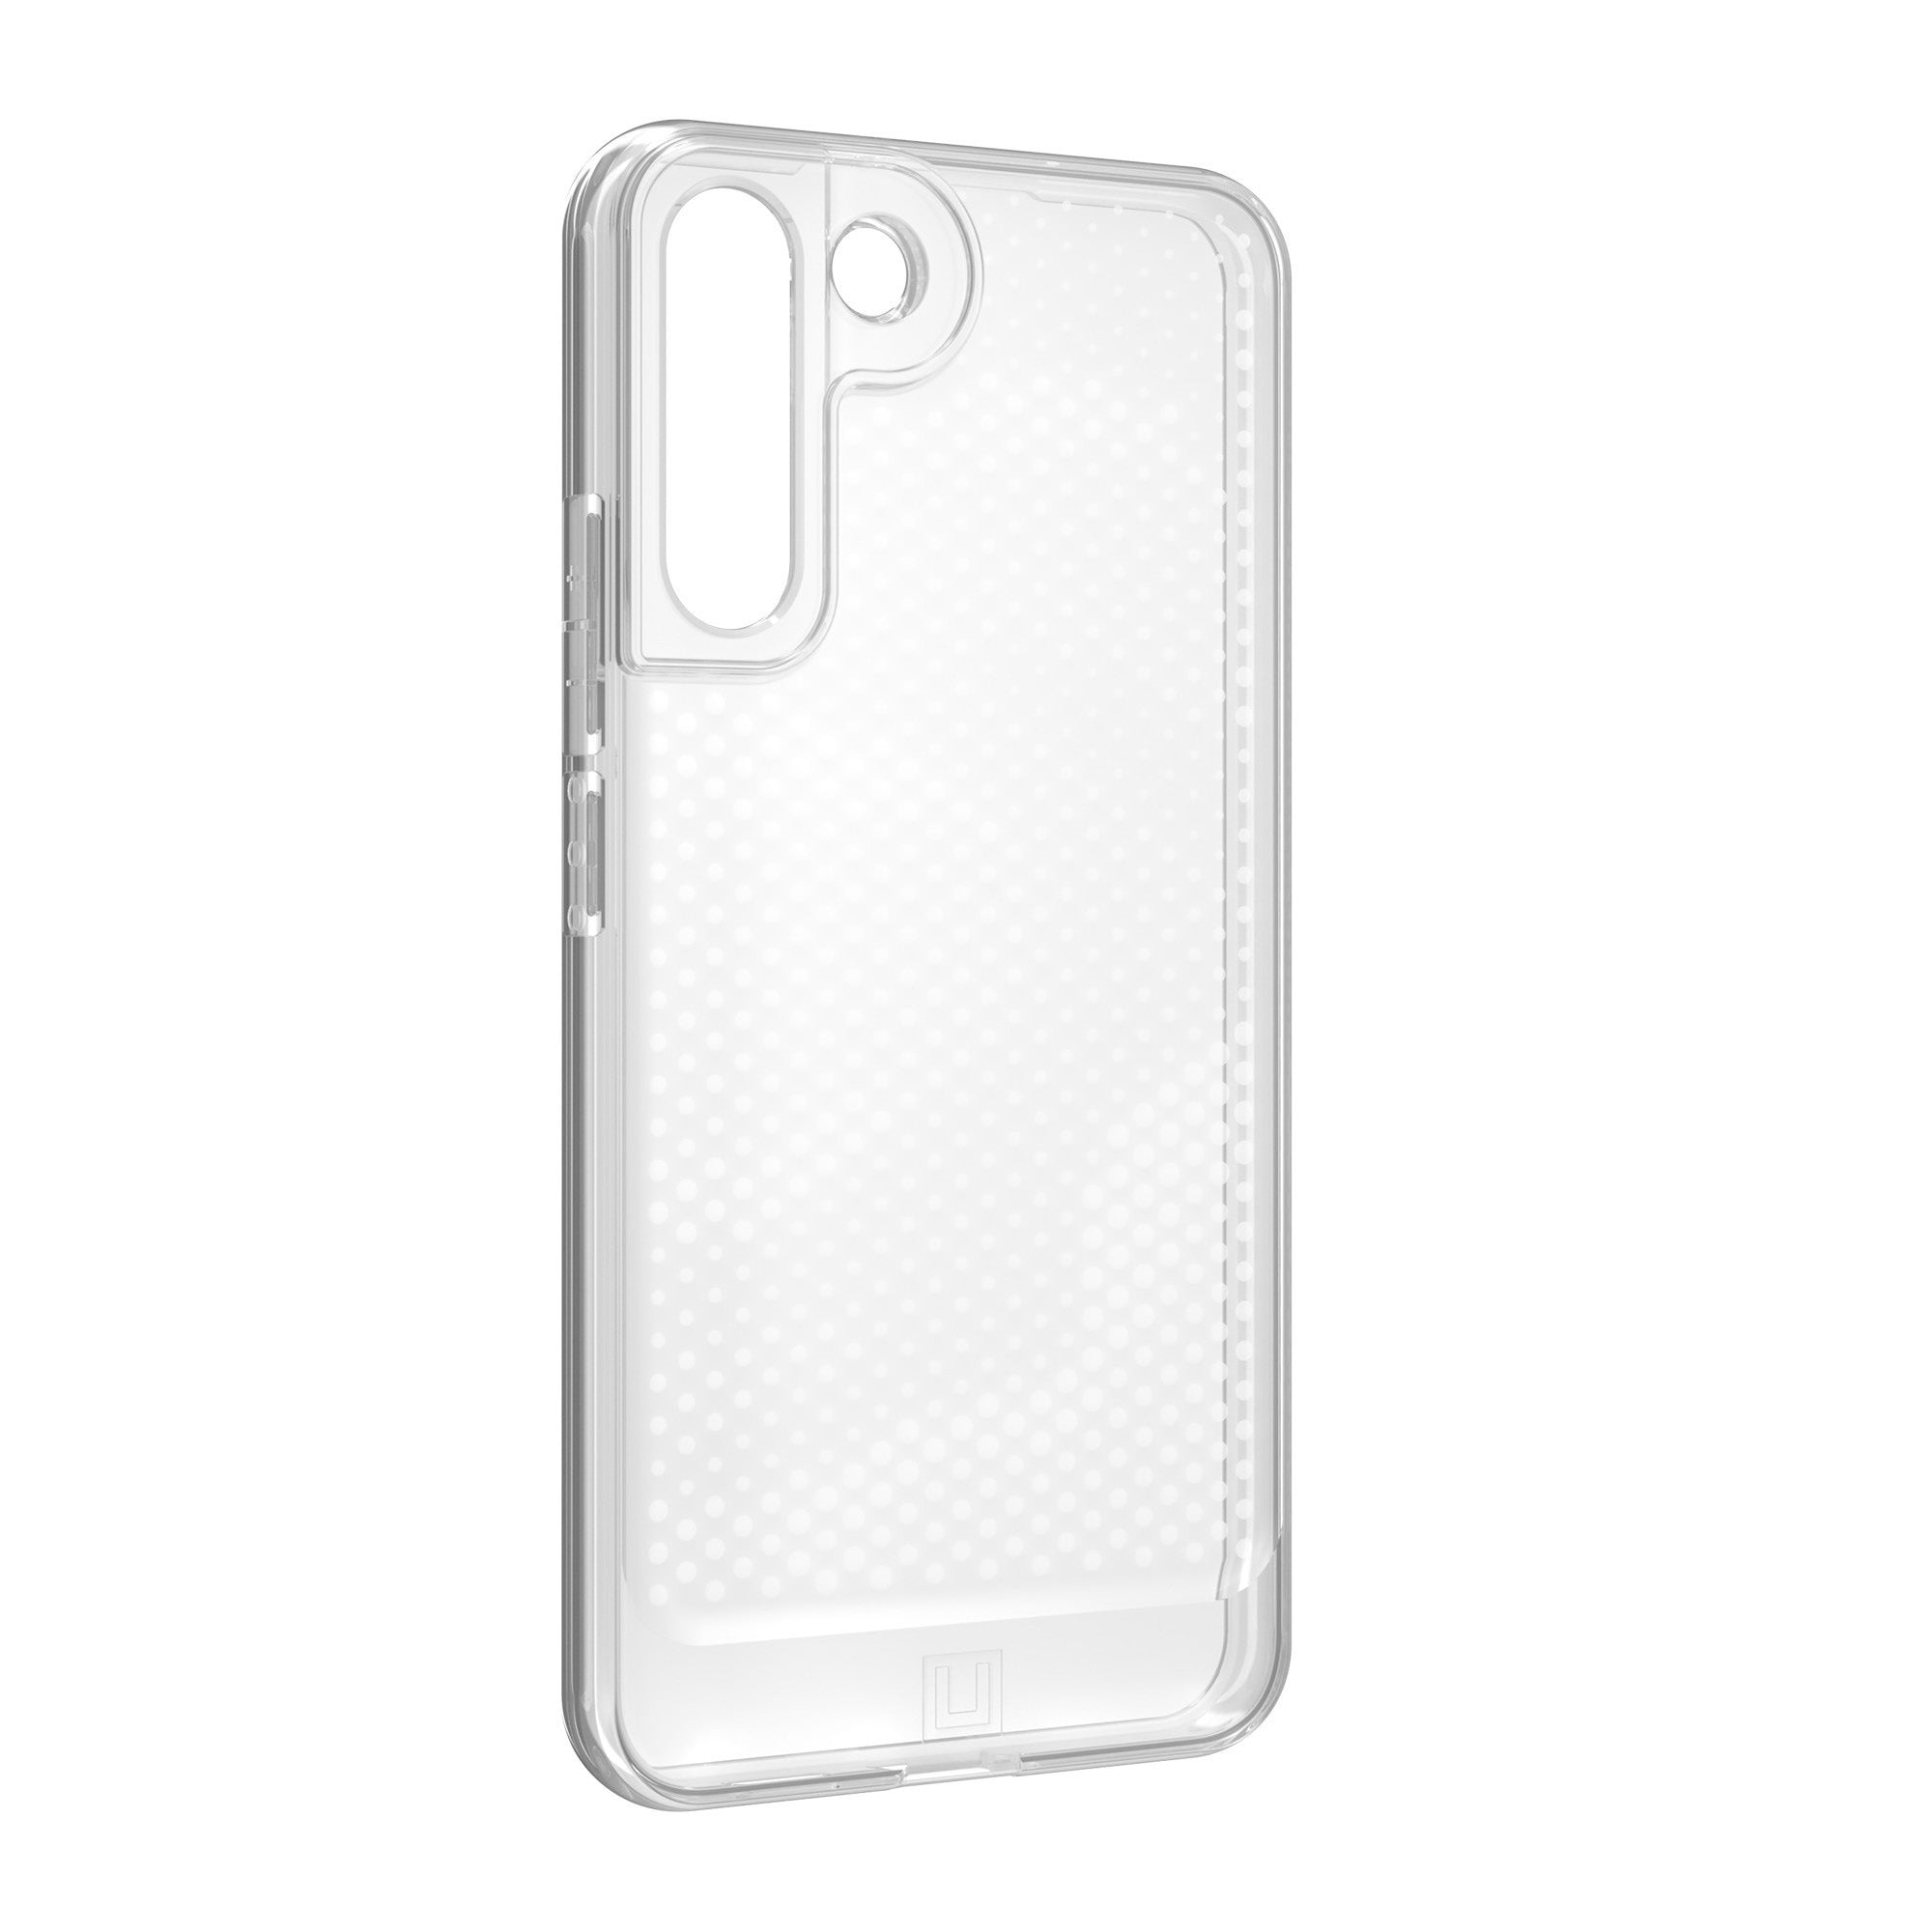 Samsung Galaxy S22+ 5G UAG Lucent Case - Clear (Ice) - 15-09629